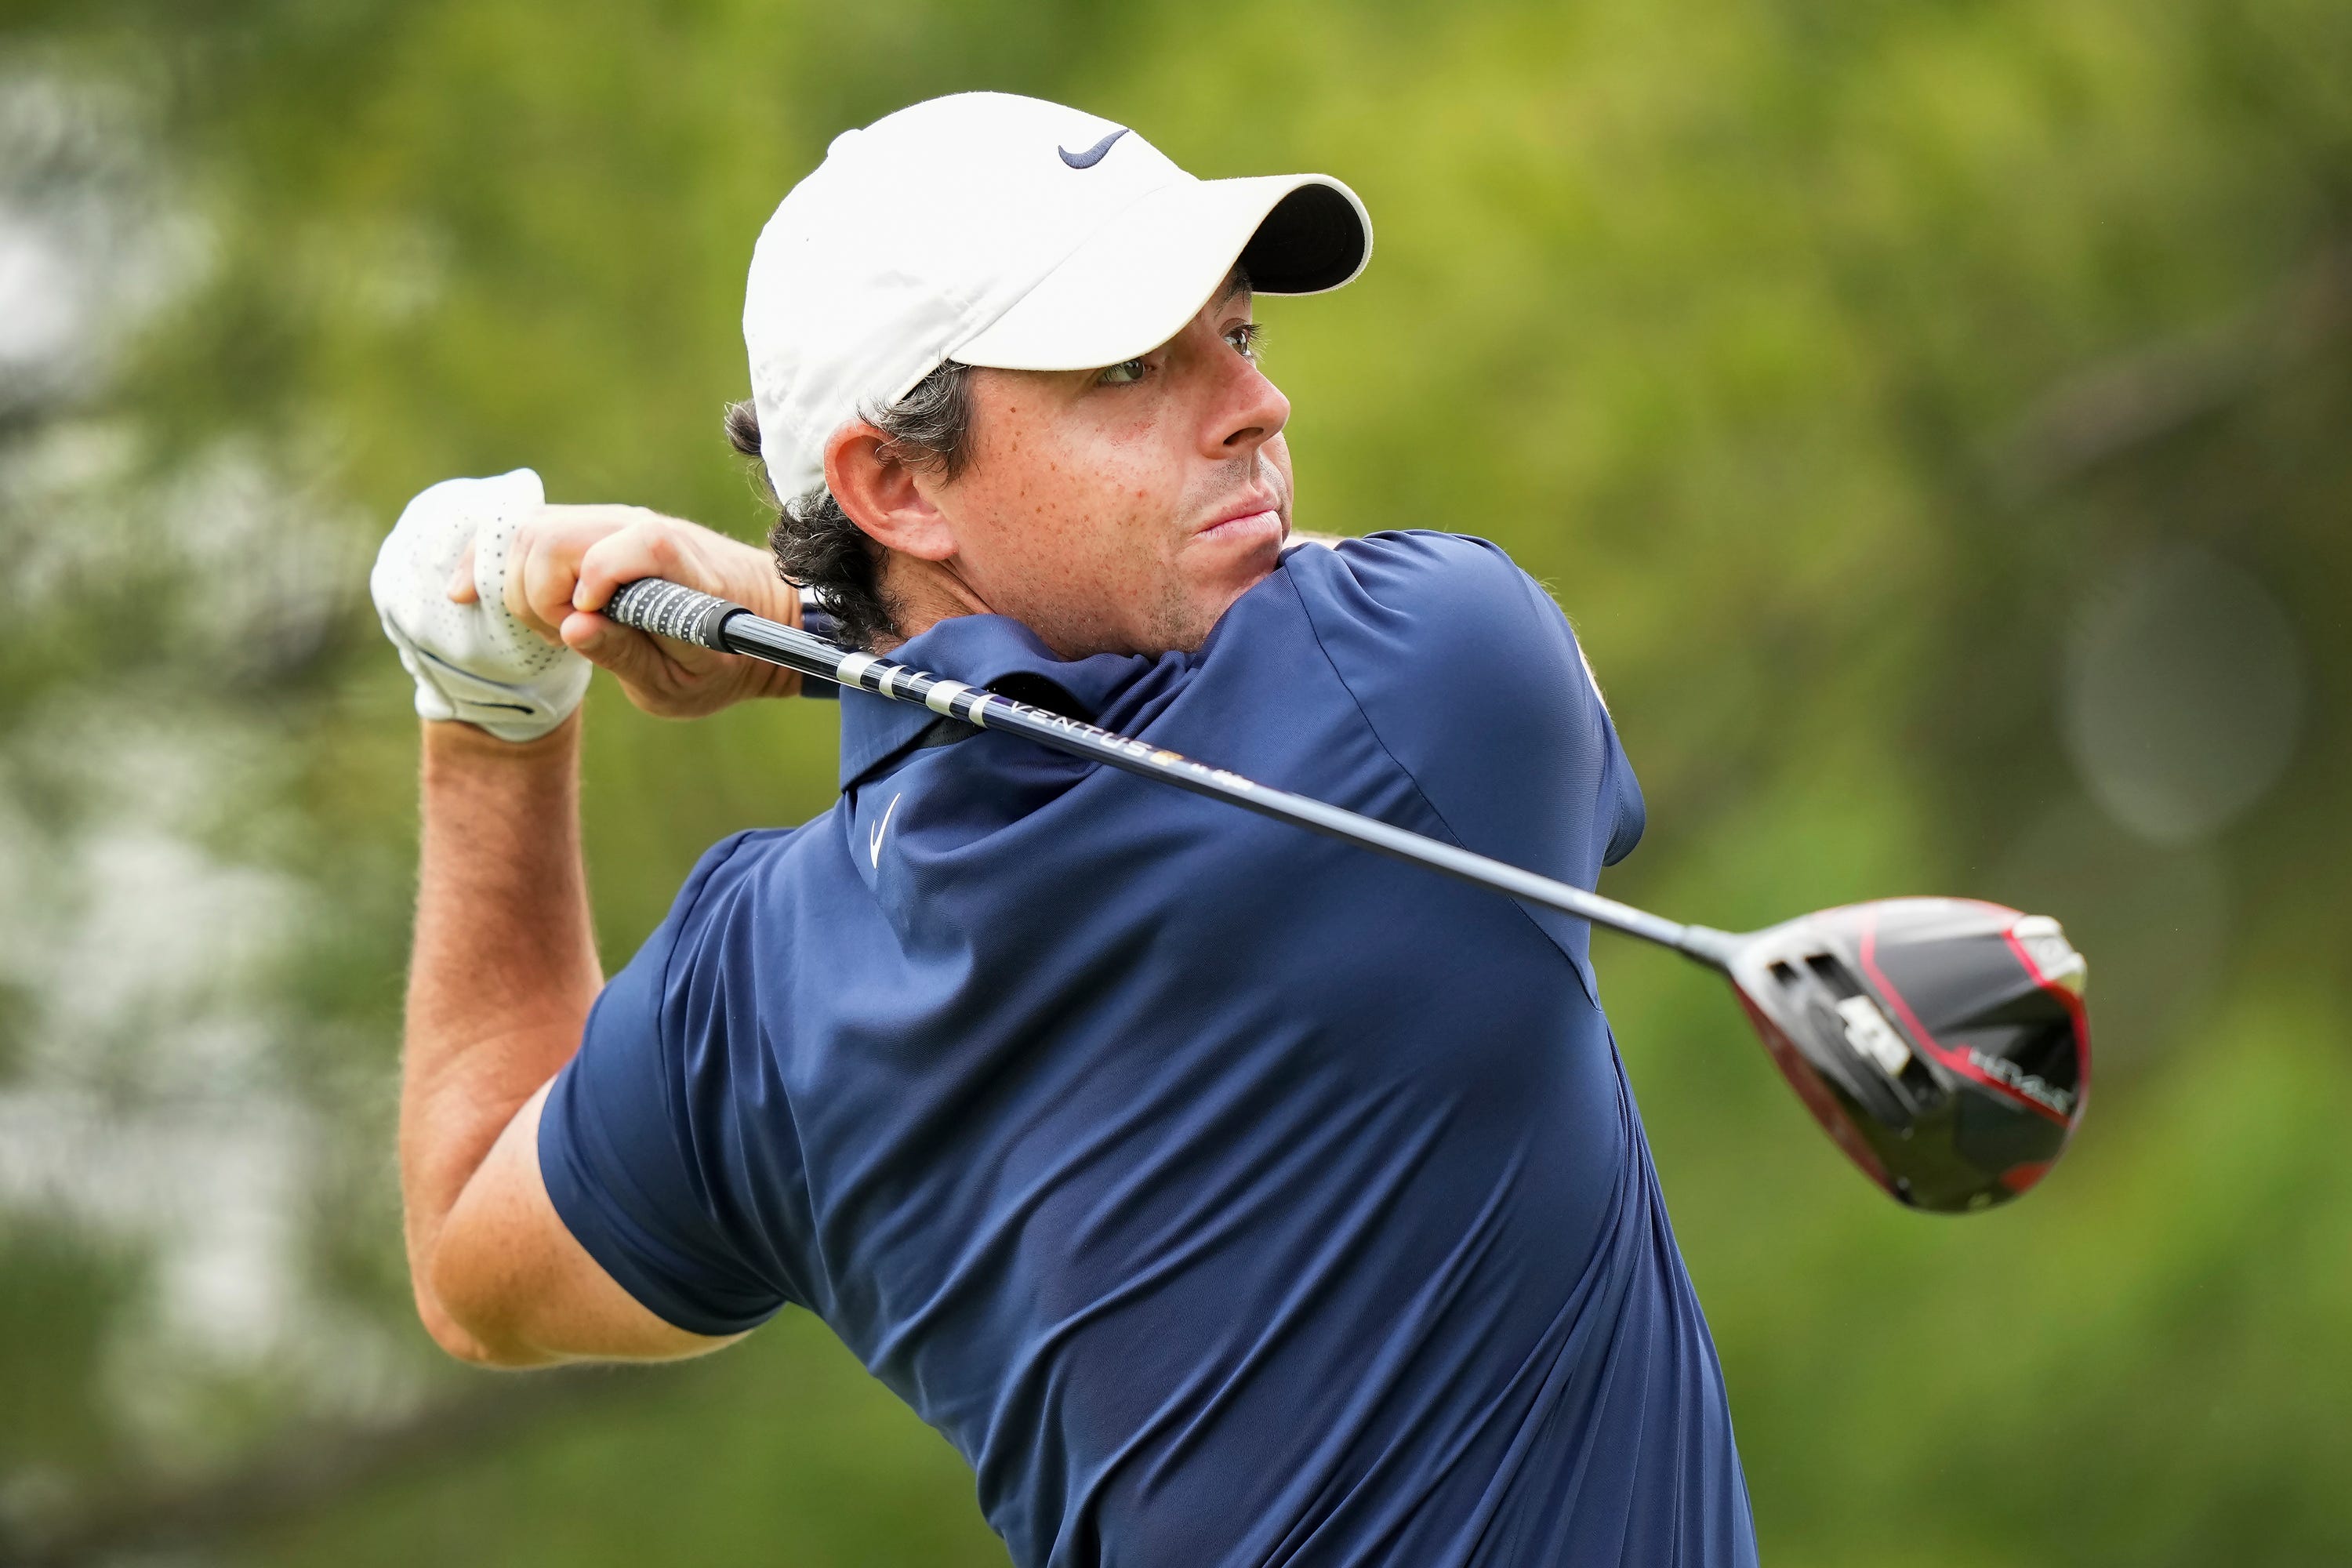 Rory McIlroy heads to the US Open looking to capture an elusive fifth major title